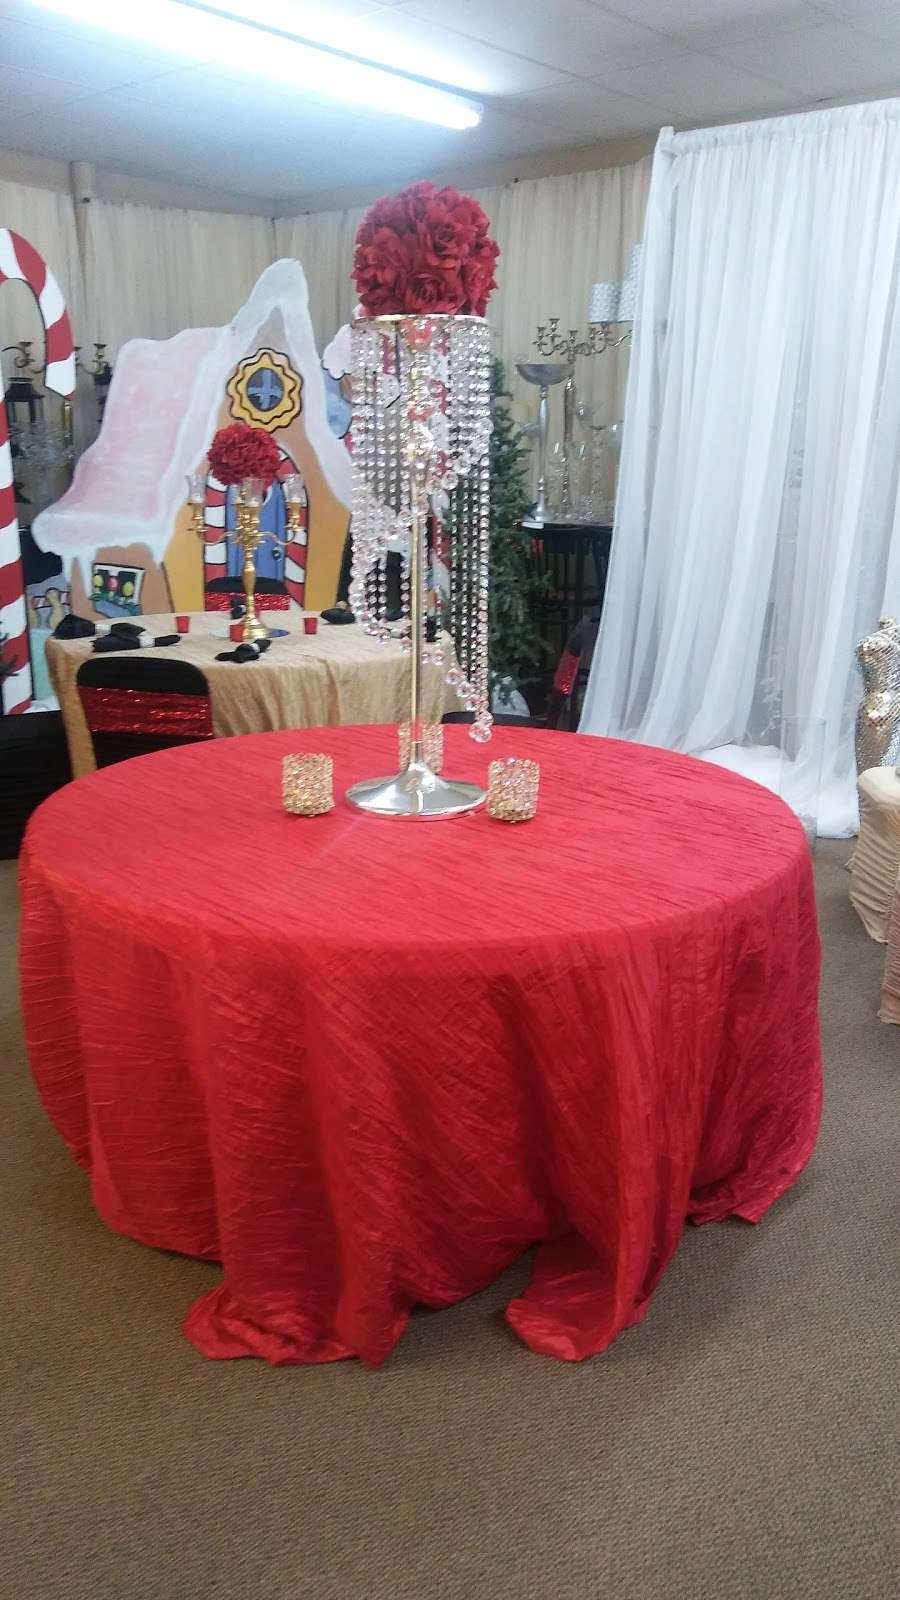 Party Props Inc | 4025 Willowbend Blvd #302, Houston, TX 77025, USA | Phone: (713) 868-5433